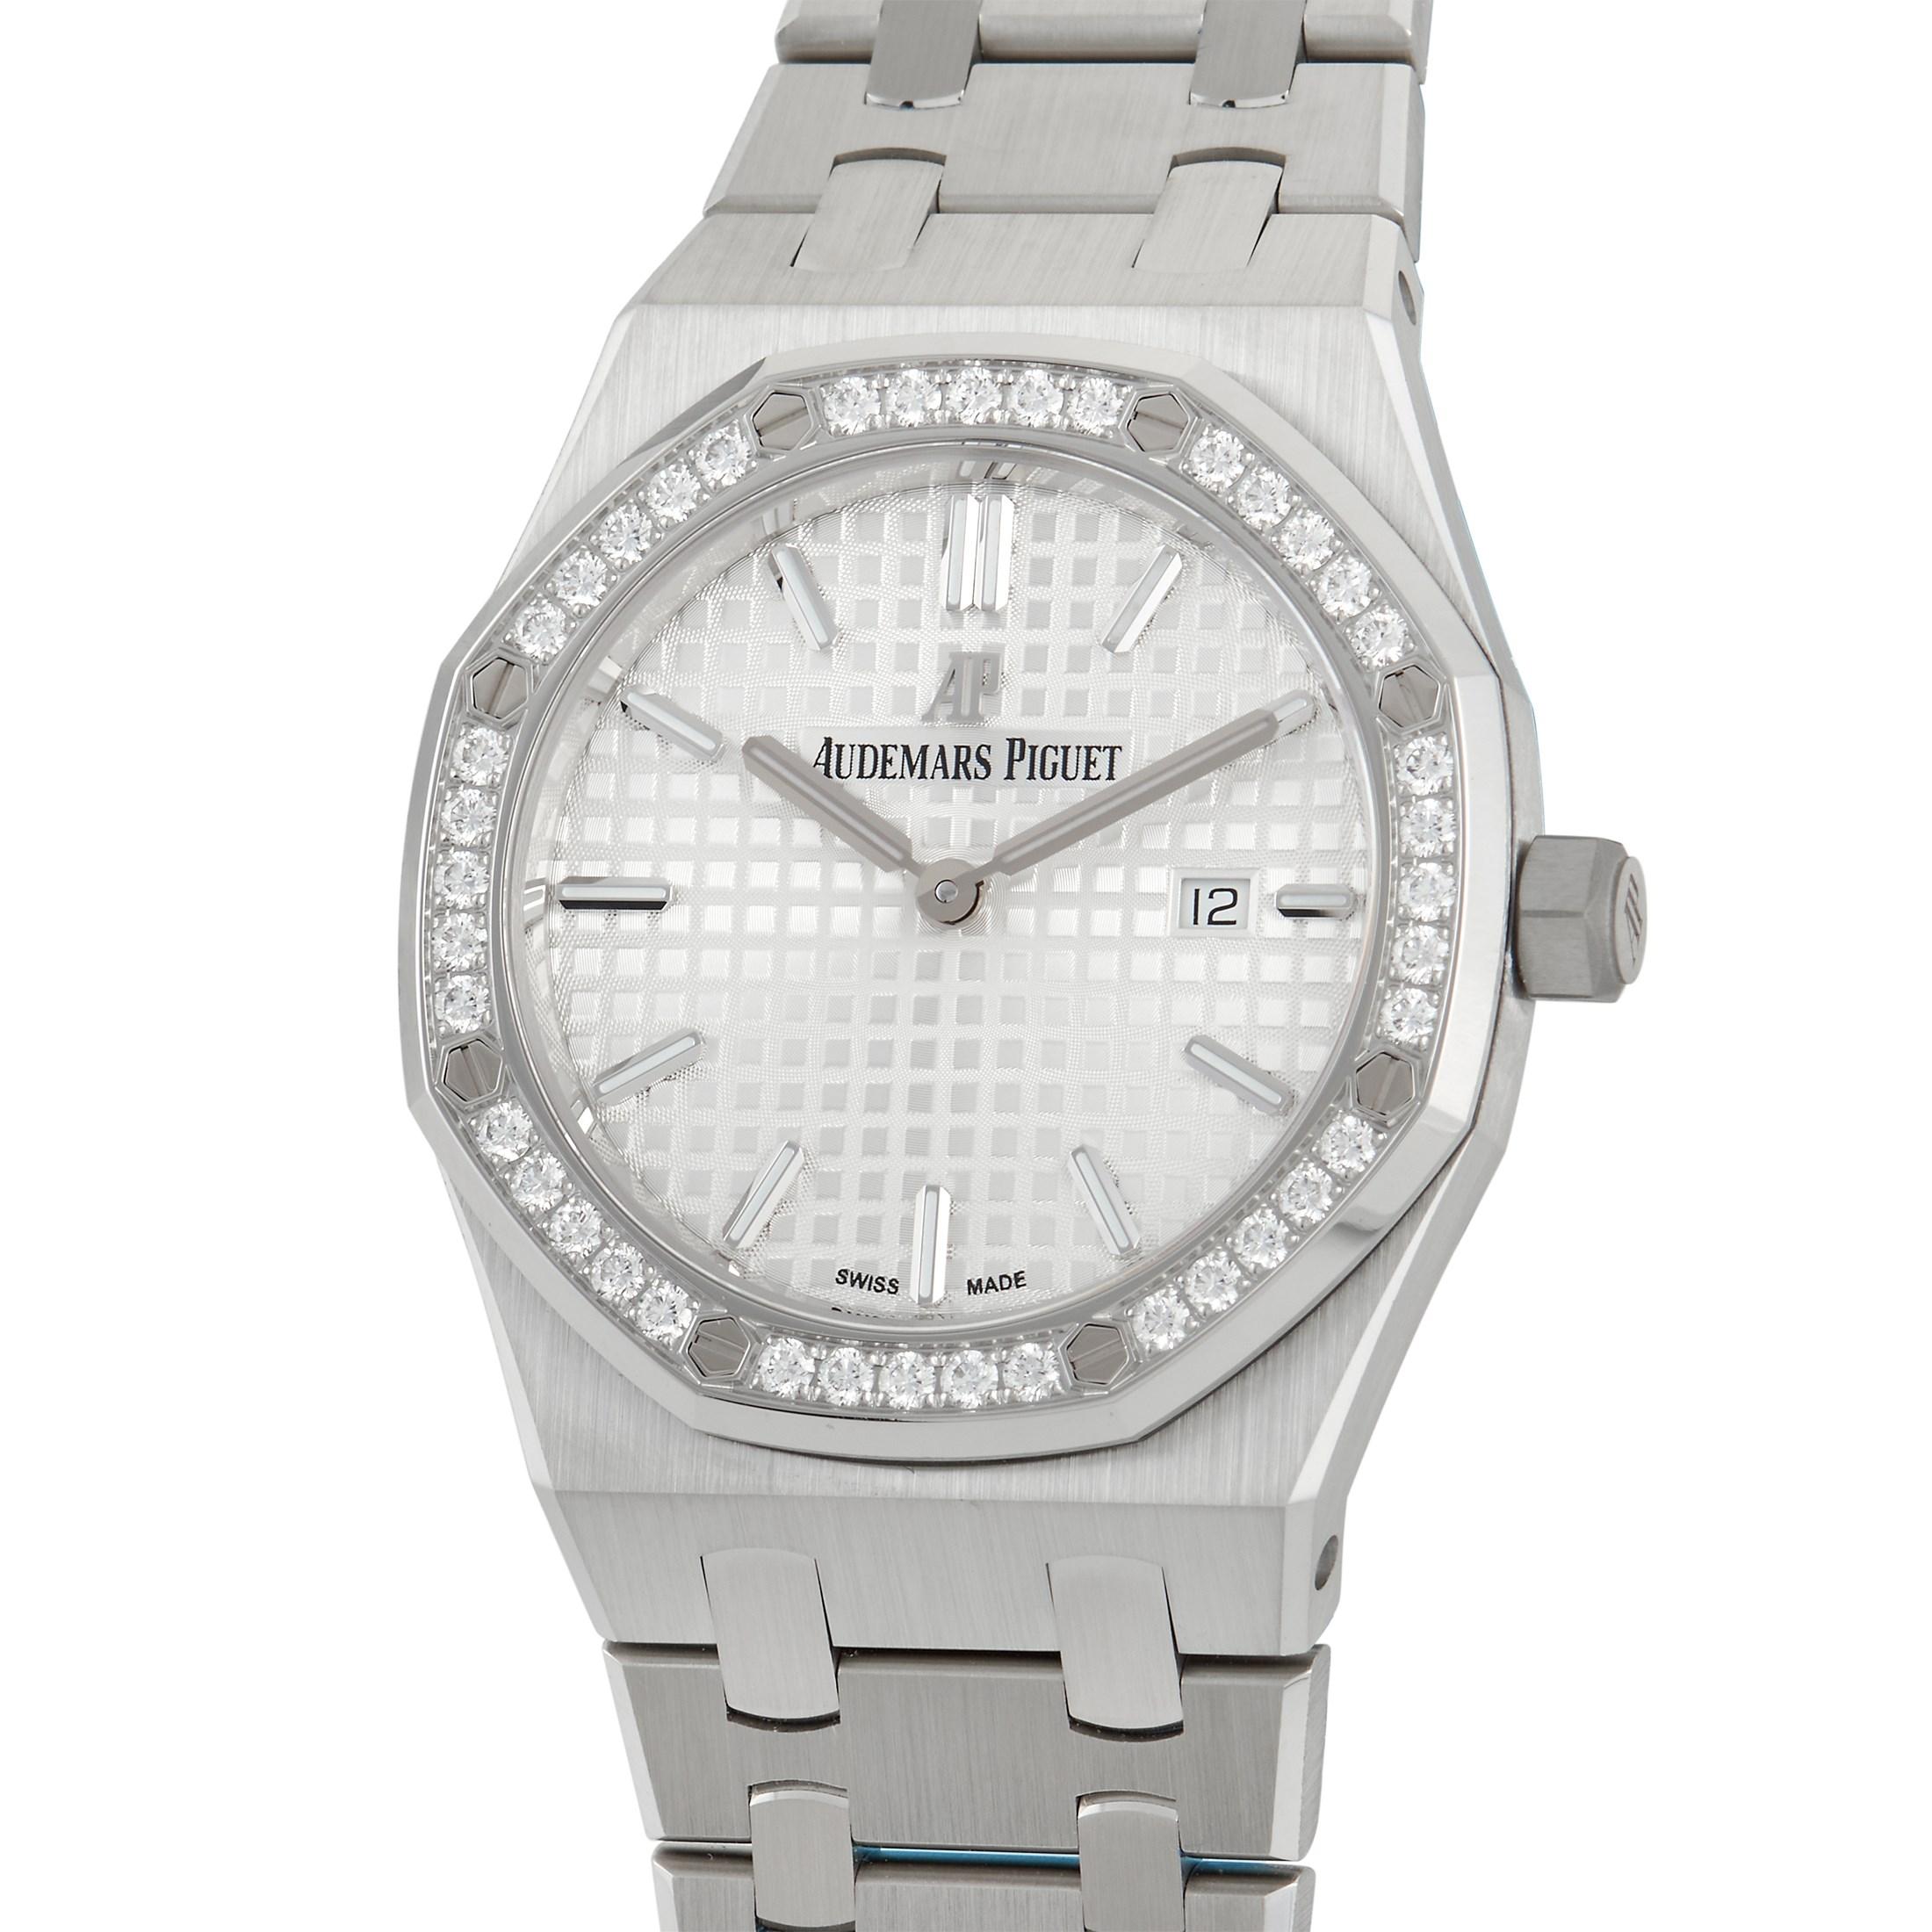 The Audemars Piguet Royal Oak Diamond Ladies Watch, reference number 67651ST.ZZ.1261ST.01, will continually emanate light.  

This breathtaking timepiece begins with a 33mm case and bracelet crafted from shimmering stainless steel. But it’s the